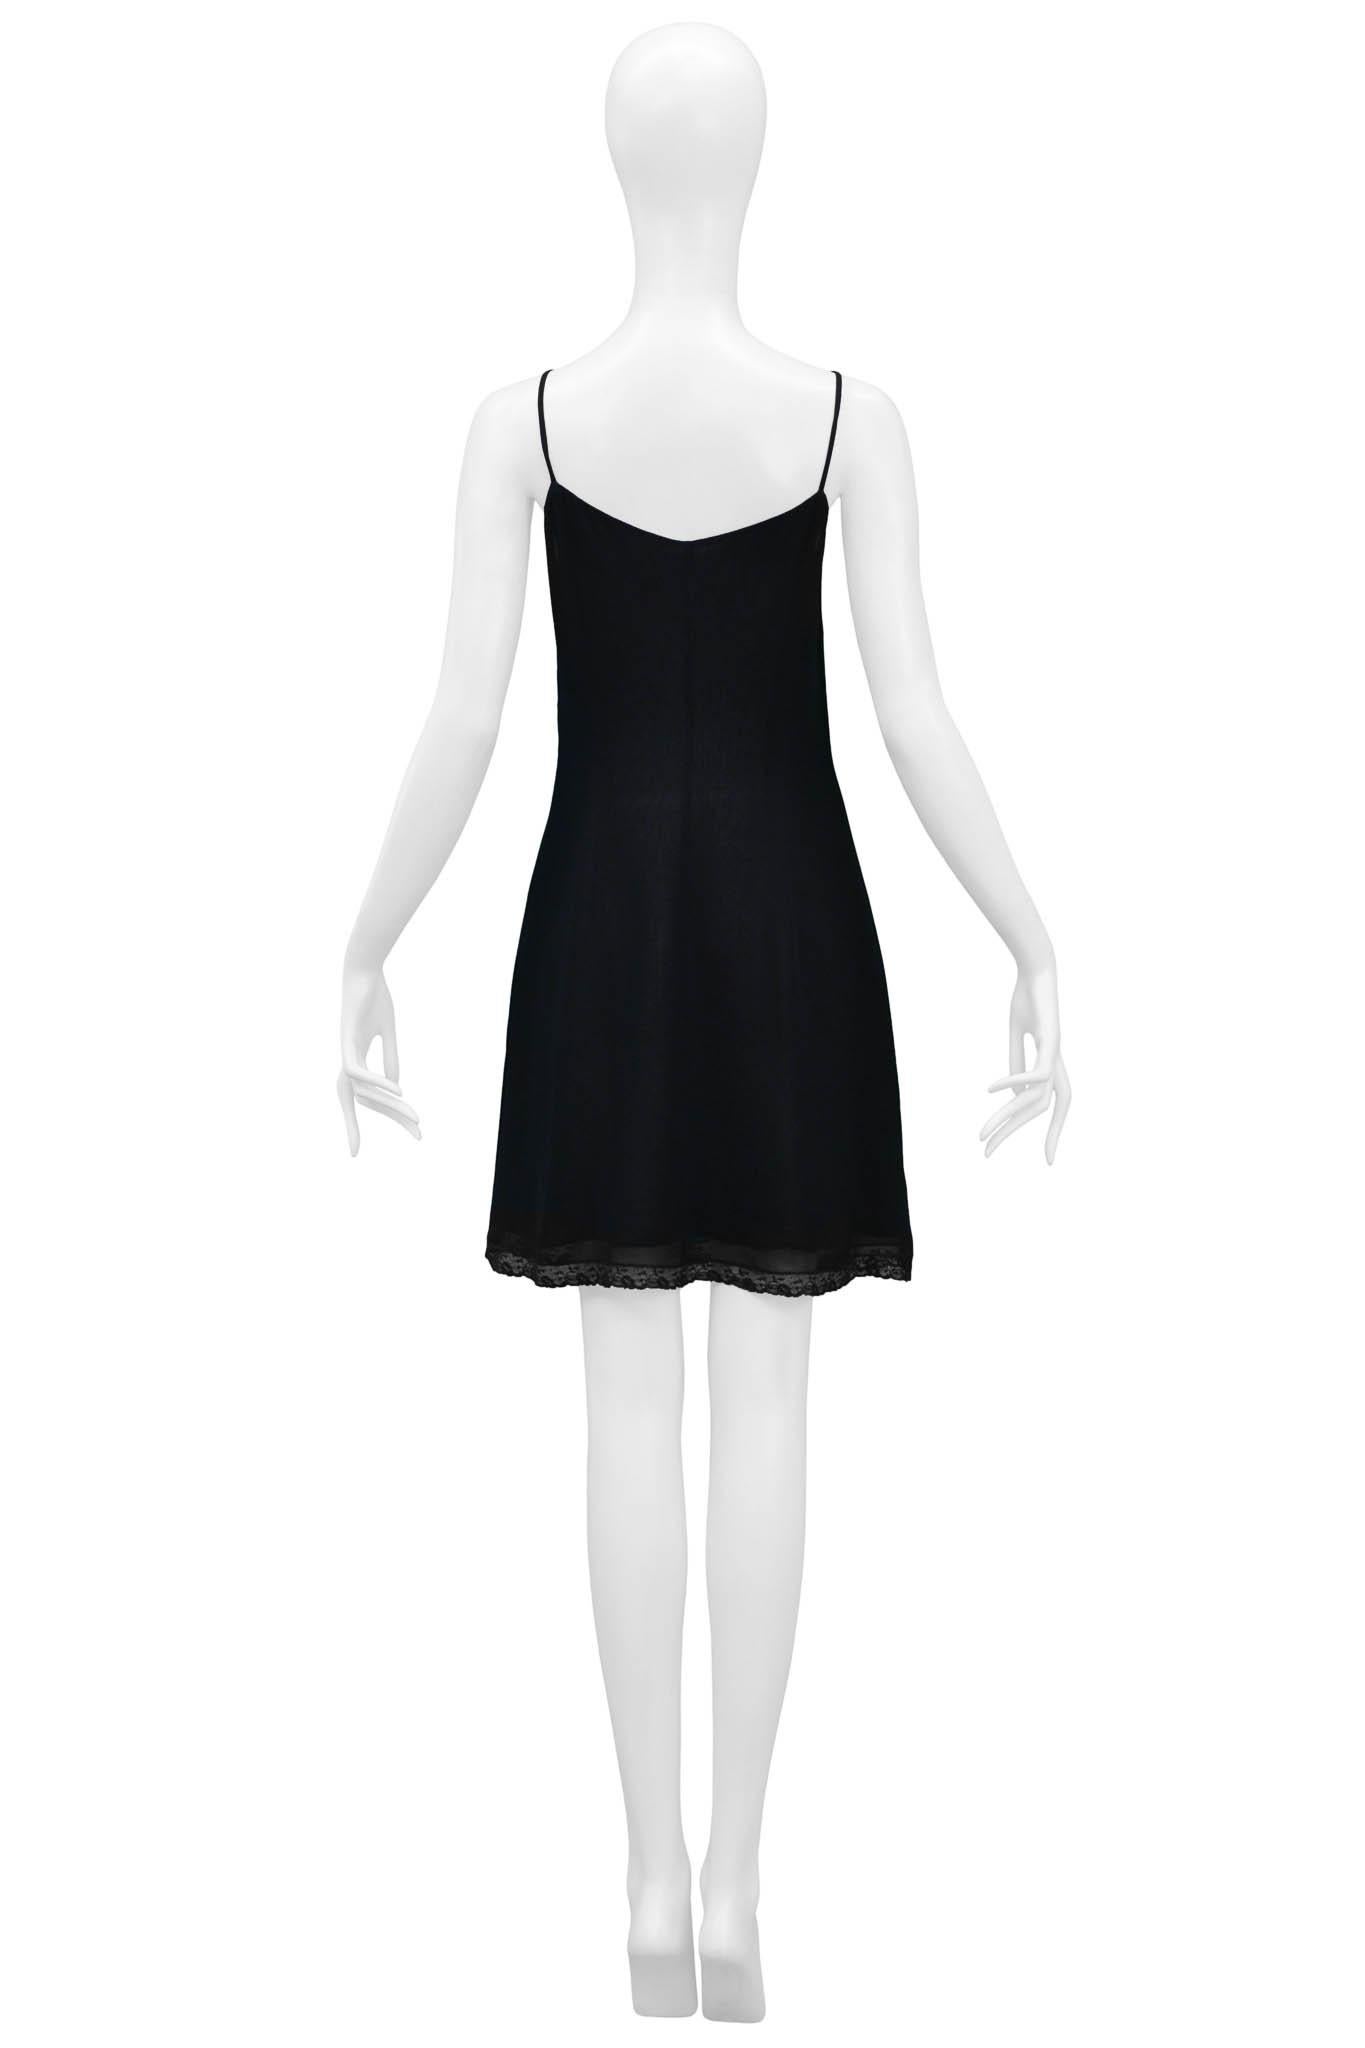 Dolce & Gabbana Black Slip Dress With Lace Trim In Excellent Condition For Sale In Los Angeles, CA